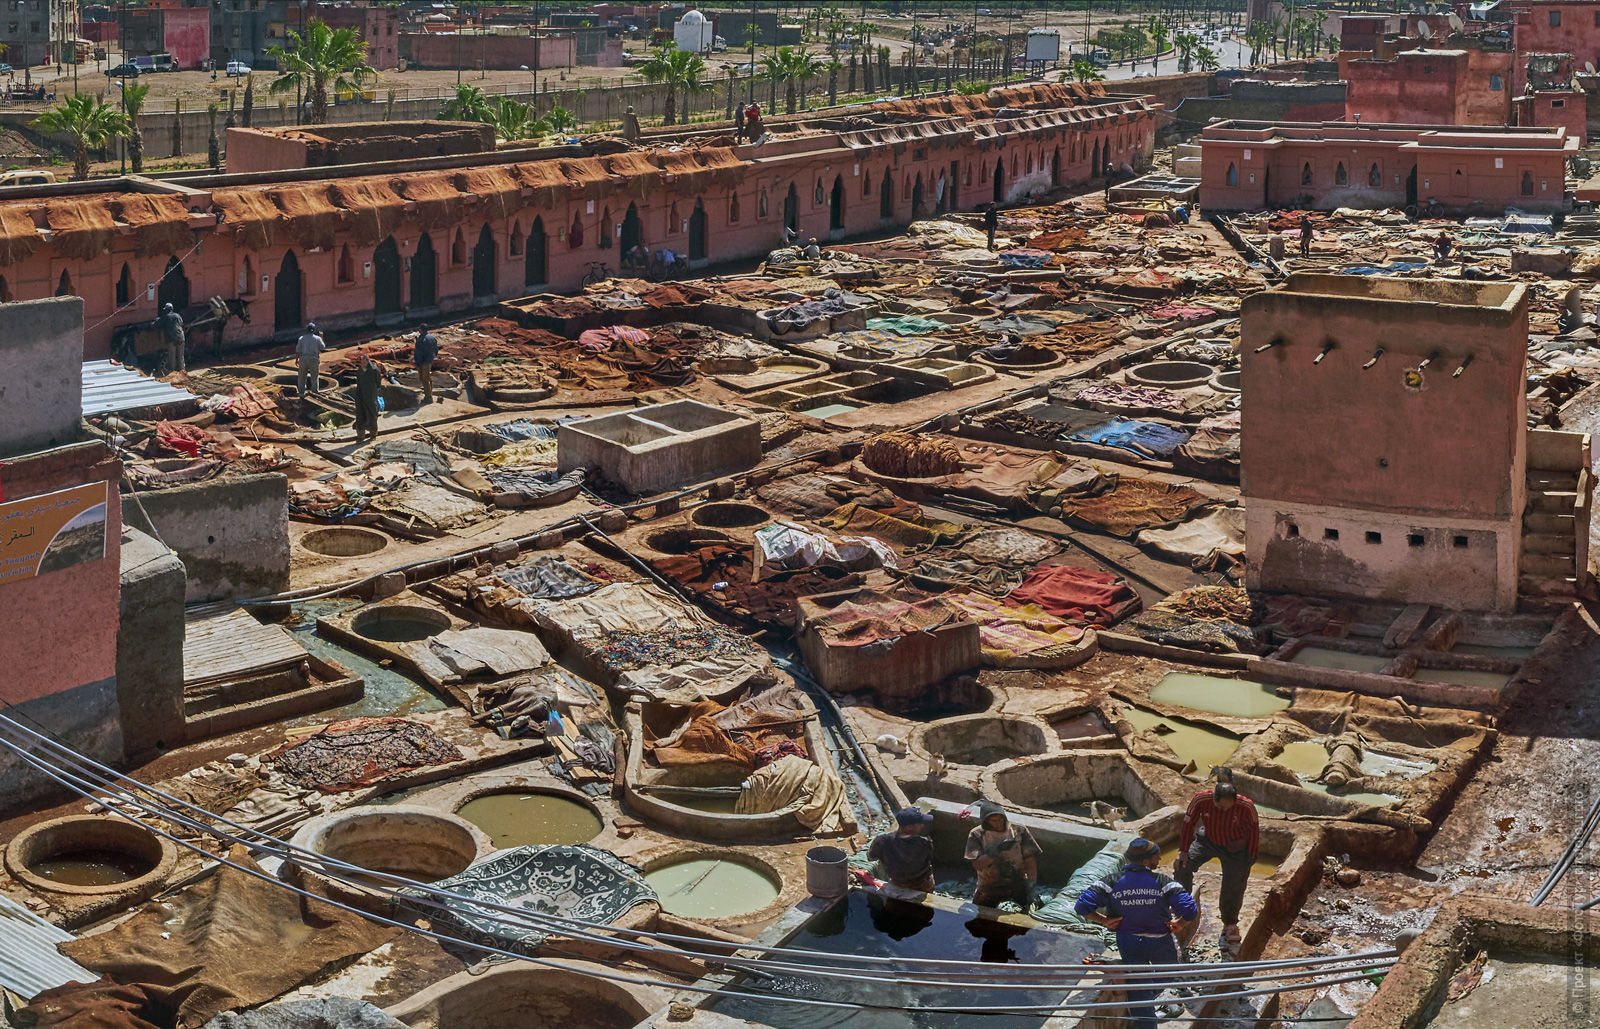 Dyeing of Marrakesh, Morocco. Adventure photo tour: medina, cascades, sands and ports of Morocco, April 4 - 17, 2020.